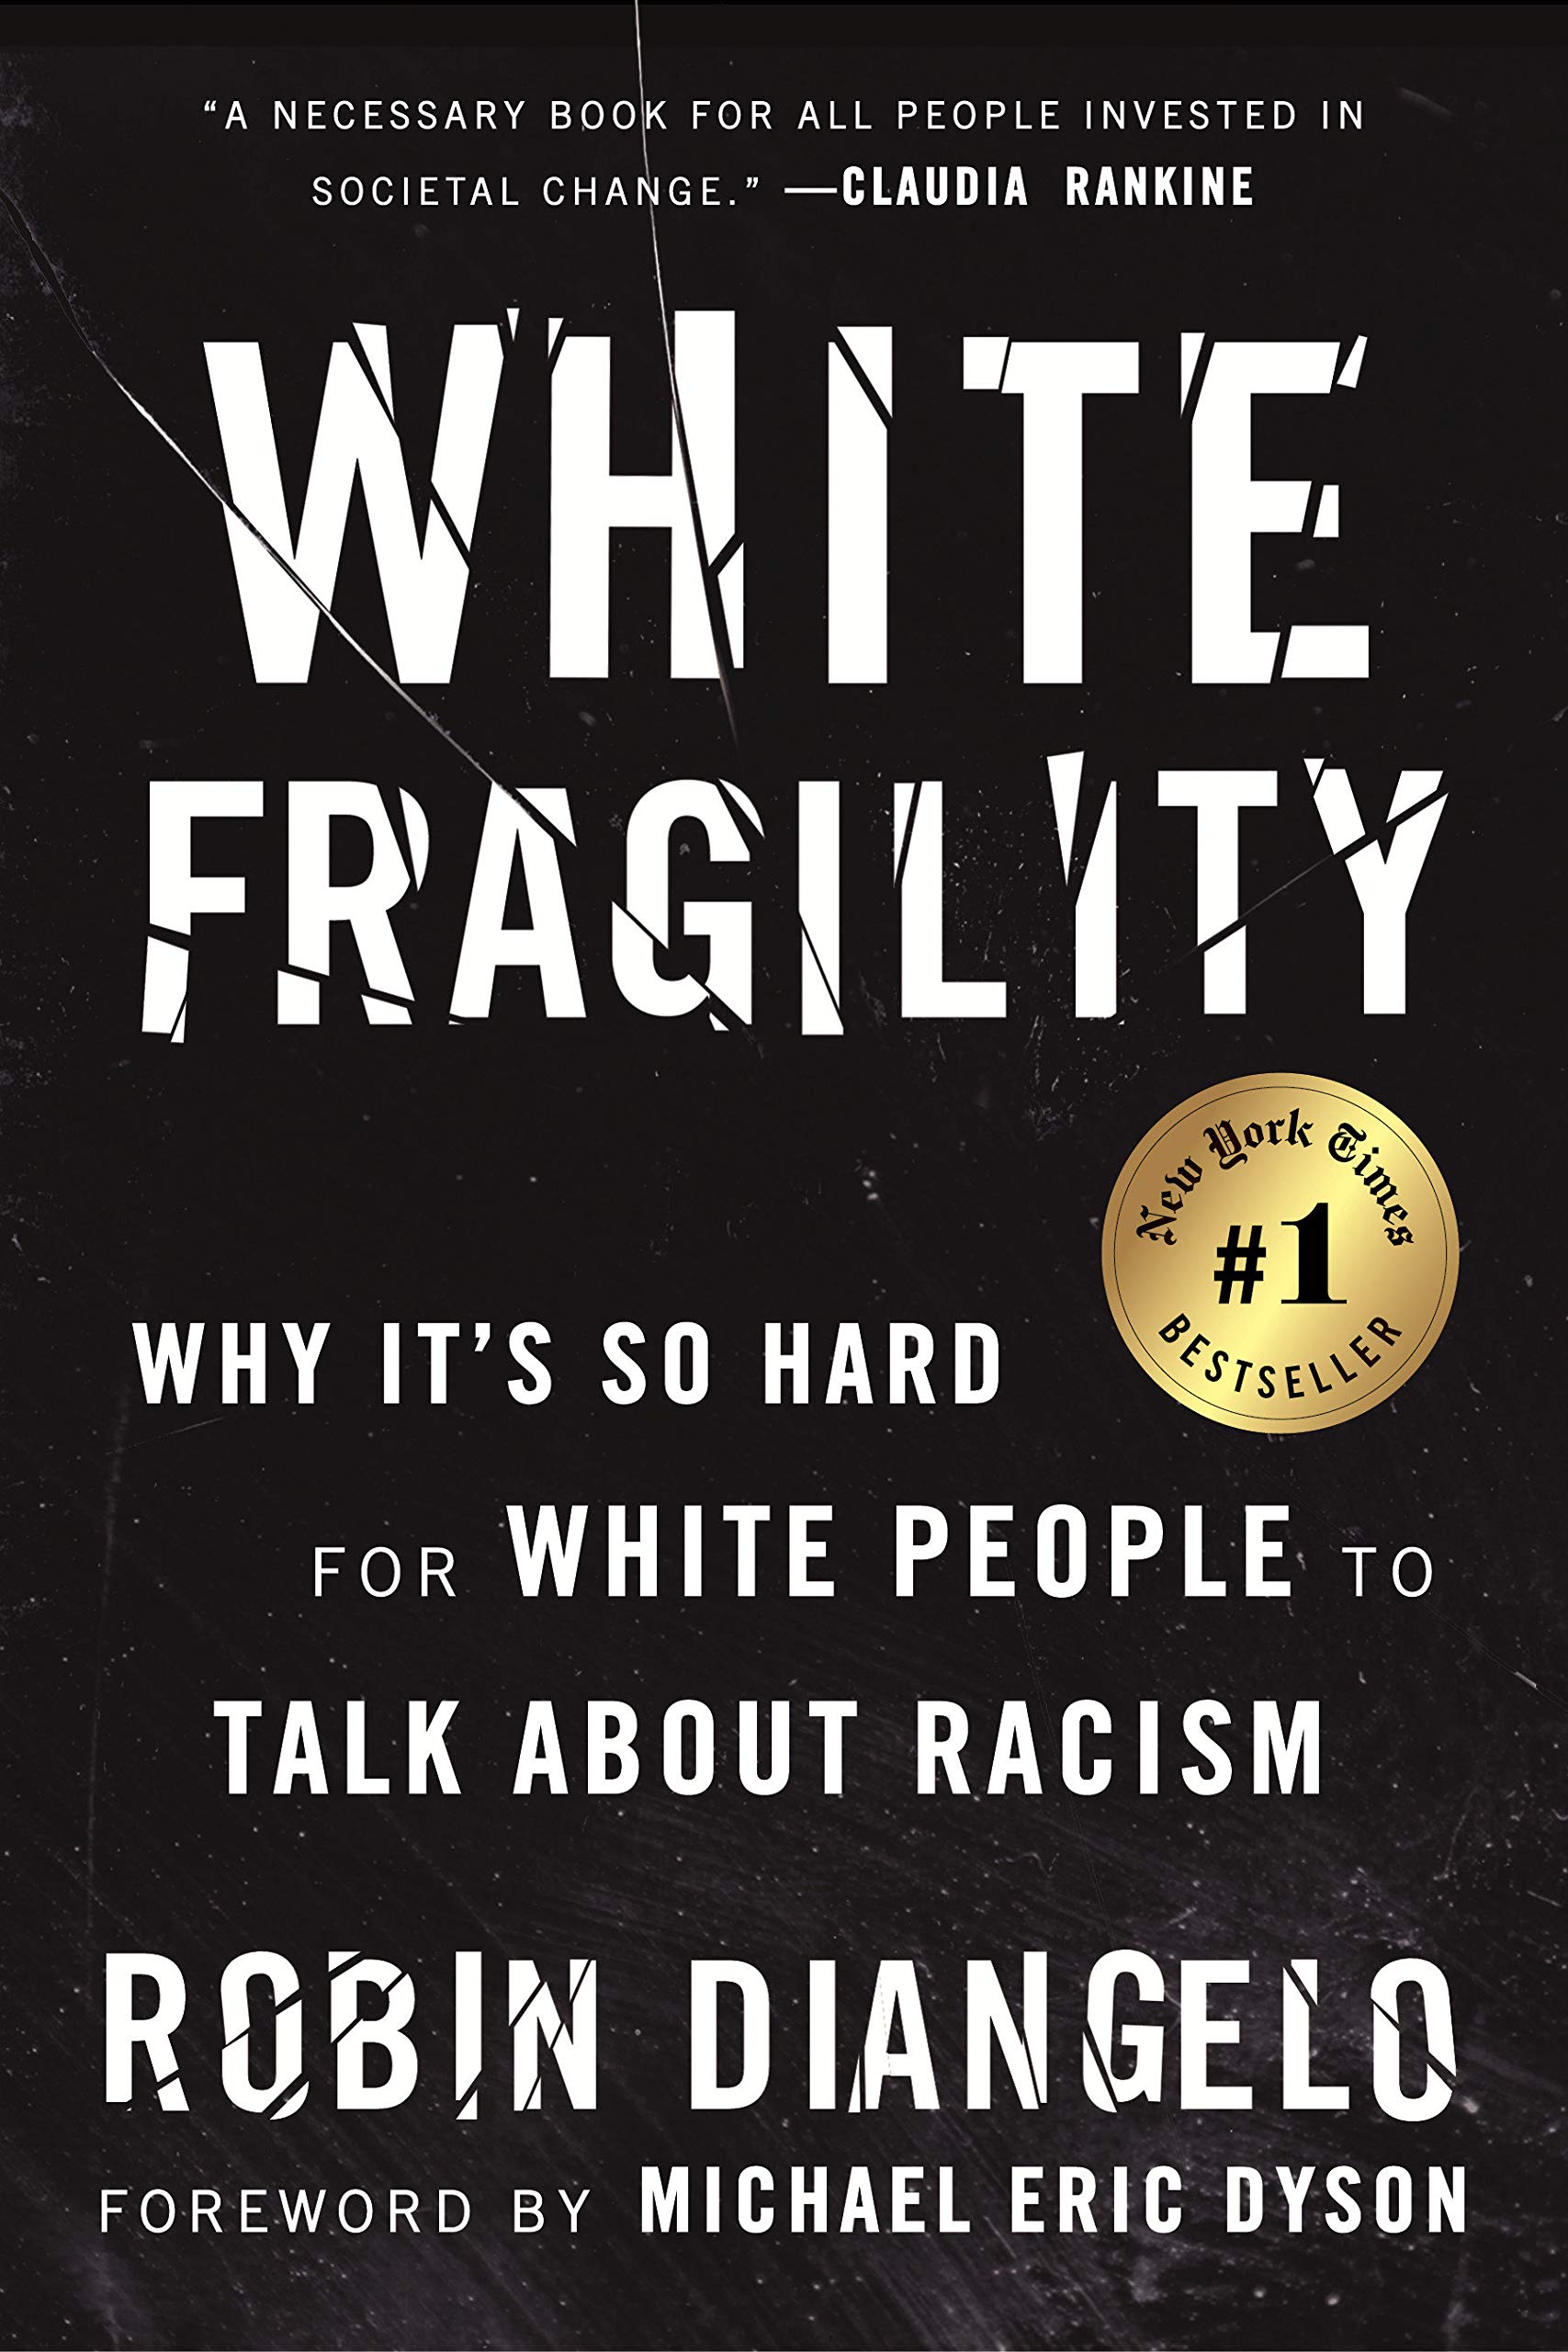 White Fragility: Why It's So Hard for White People to Talk About Racism Hardcover written by Robin DiAngelo - Best Book Store